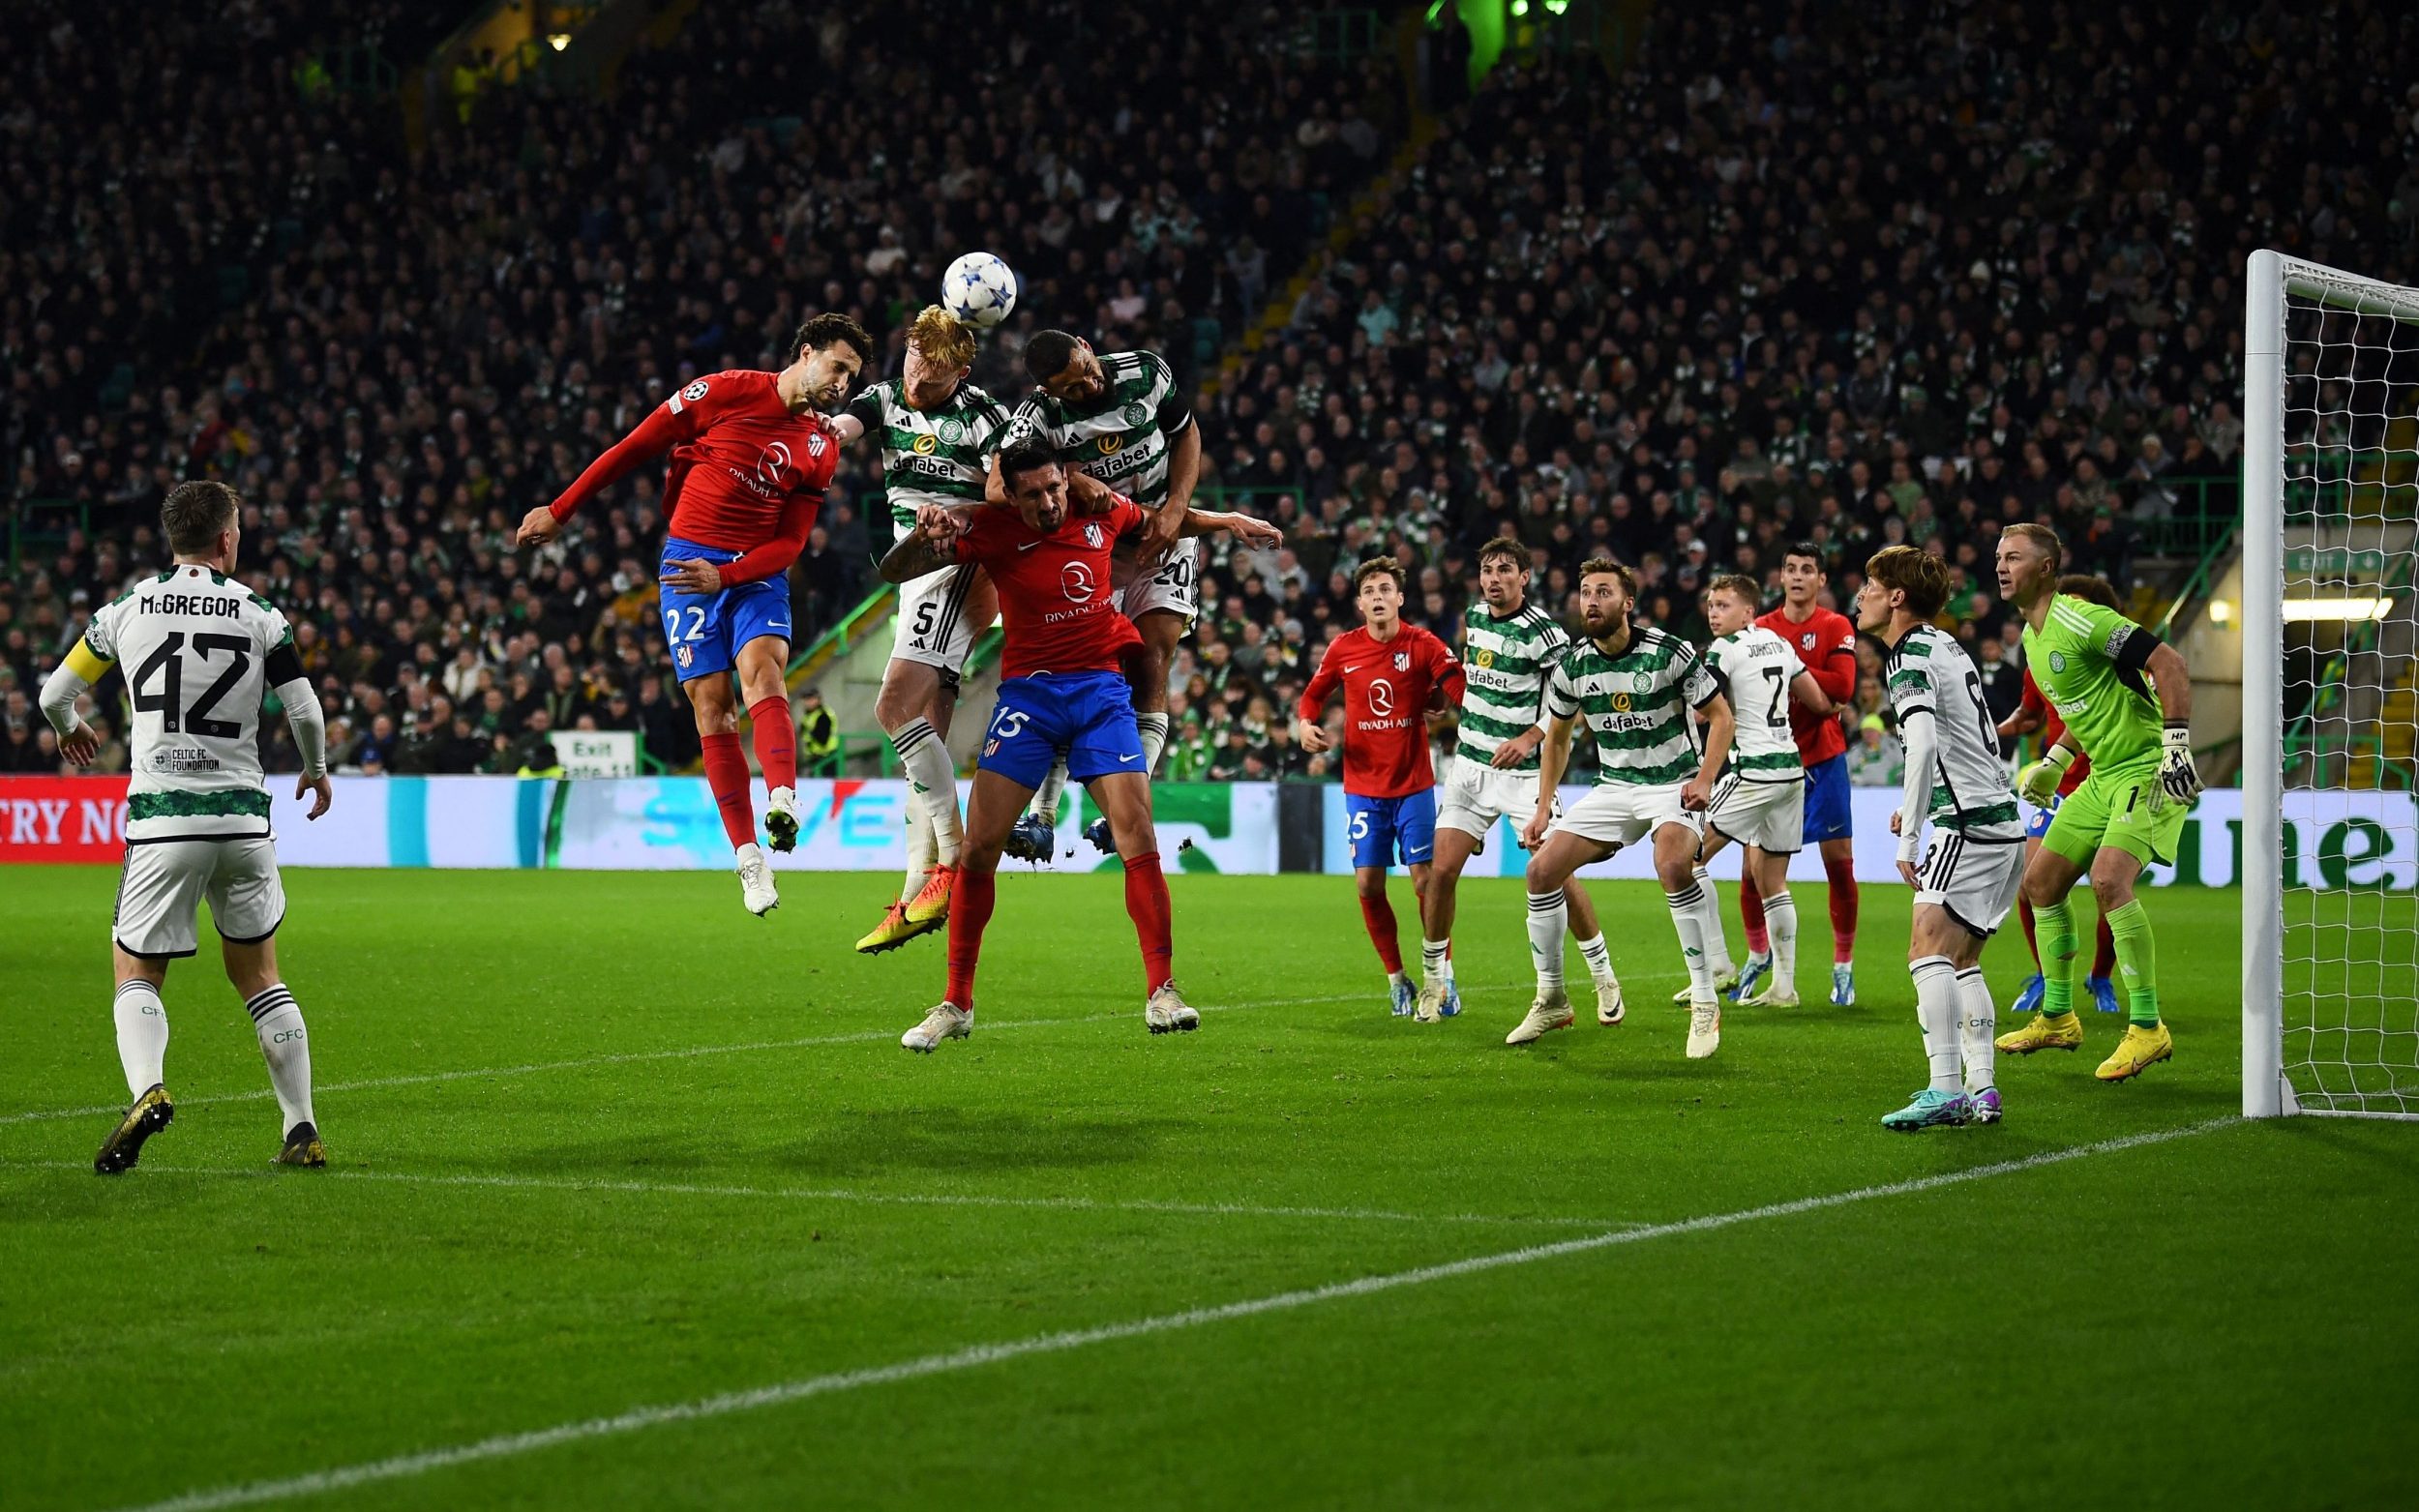 Celtic boss Brendan Rodgers says his "terrific" side will receive an injection of confidence after gaining their first Champions League point of the season in a ferocious match with Atletico Madrid.